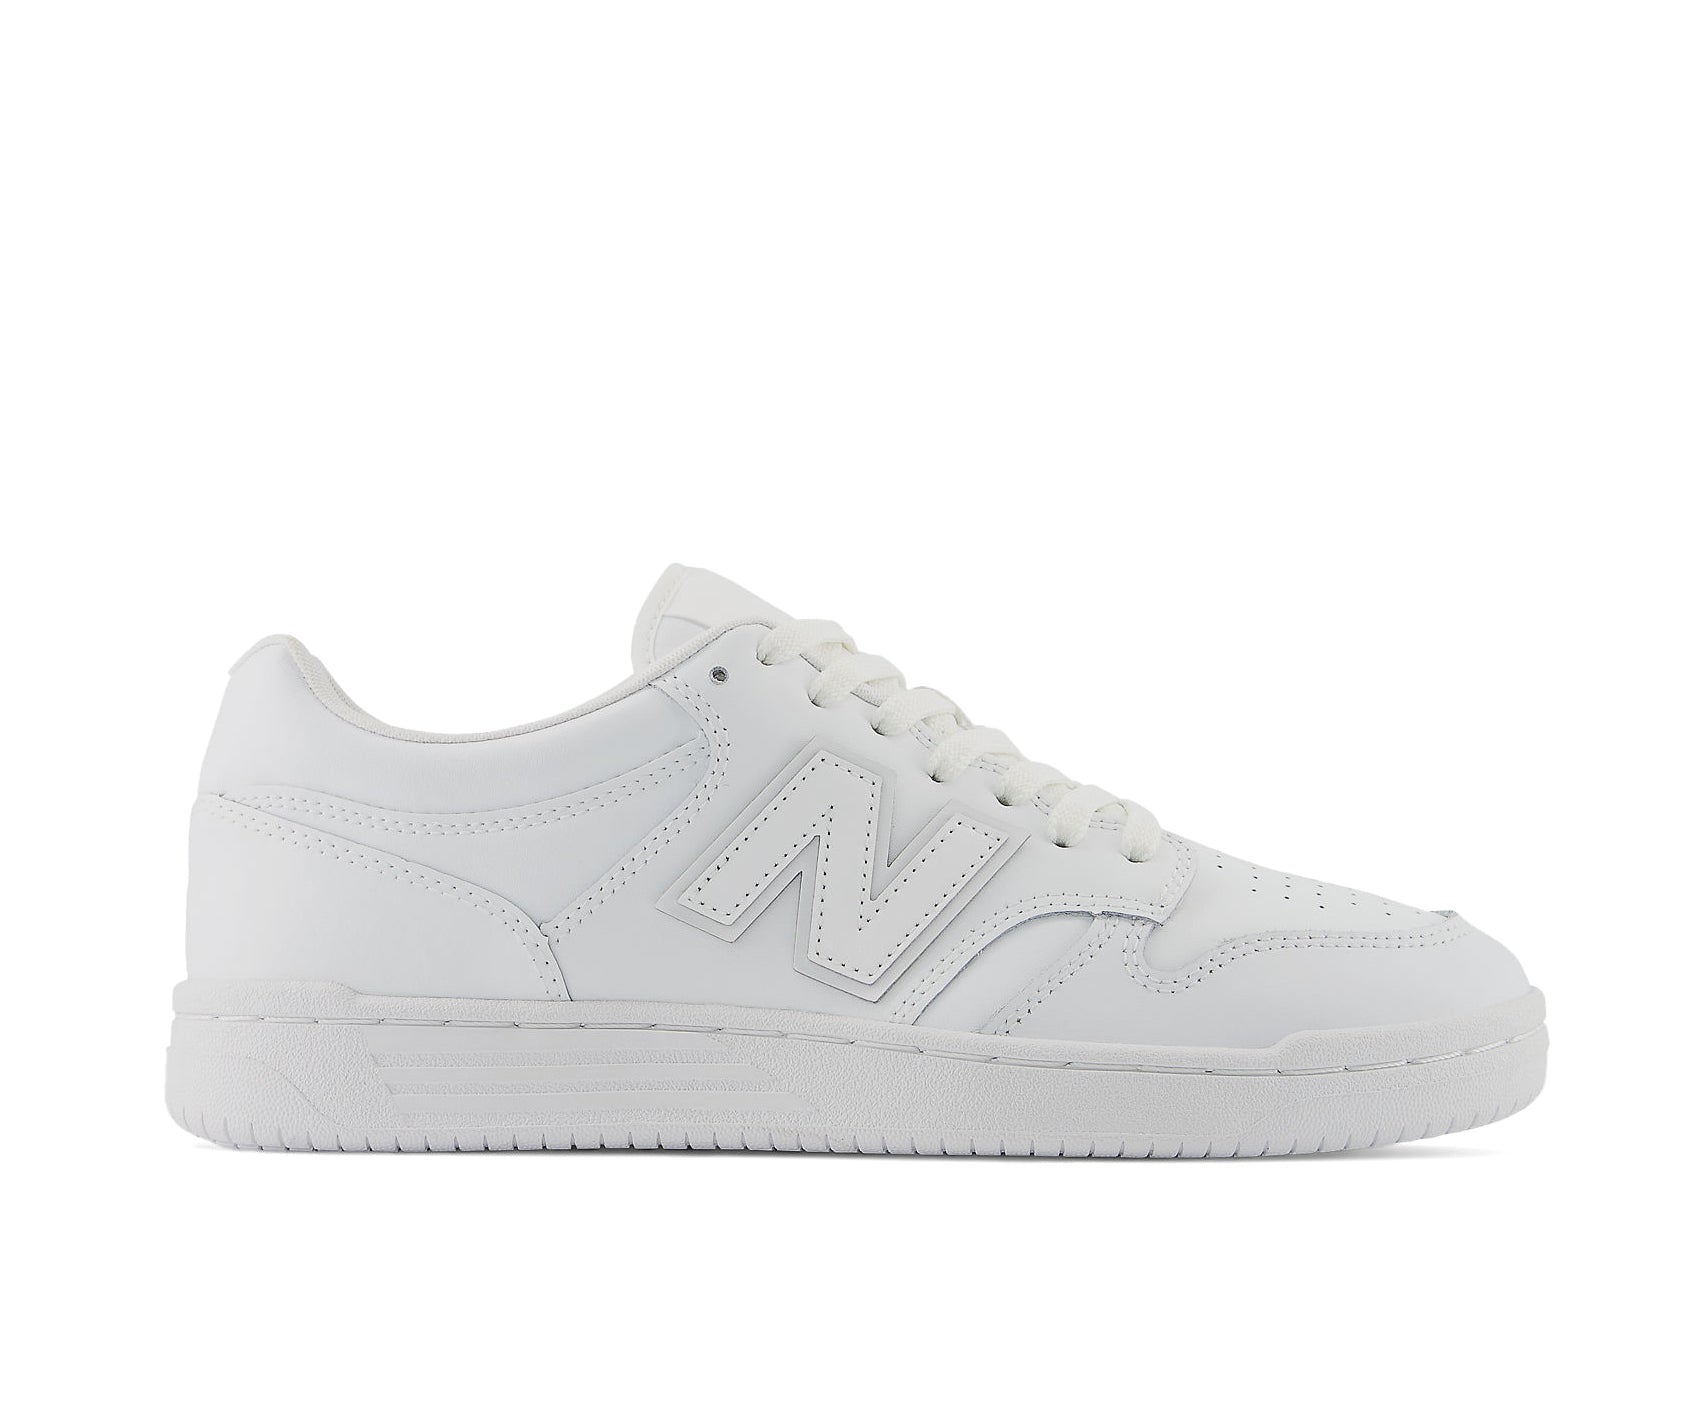 A monochrome white leather basketball sneaker from New Balance.